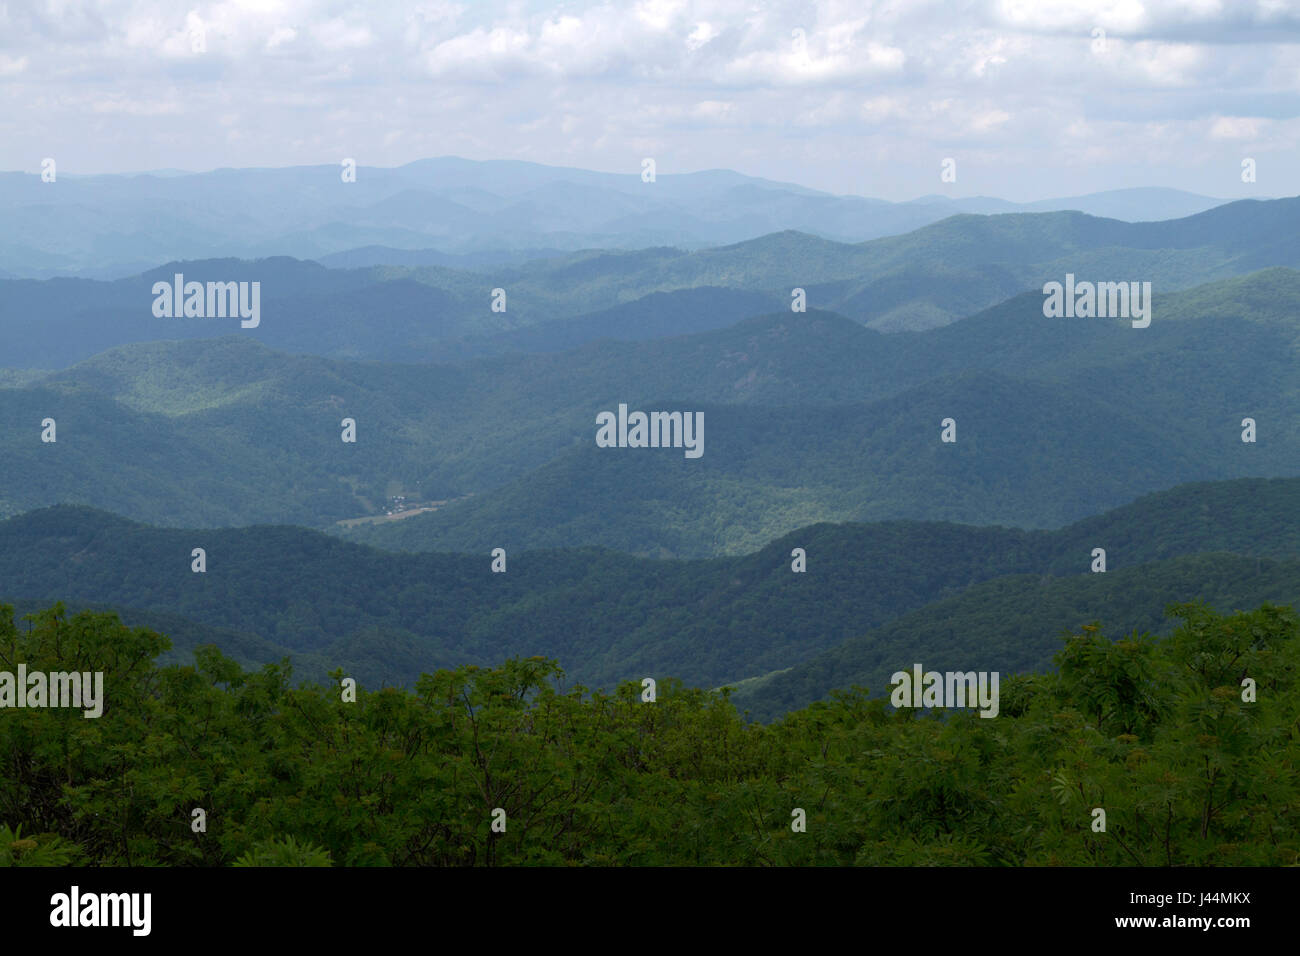 View of the seemingly endless, scenic Appalachian Mountains covered in a deep green and blue summer forest on a cloudly day Stock Photo